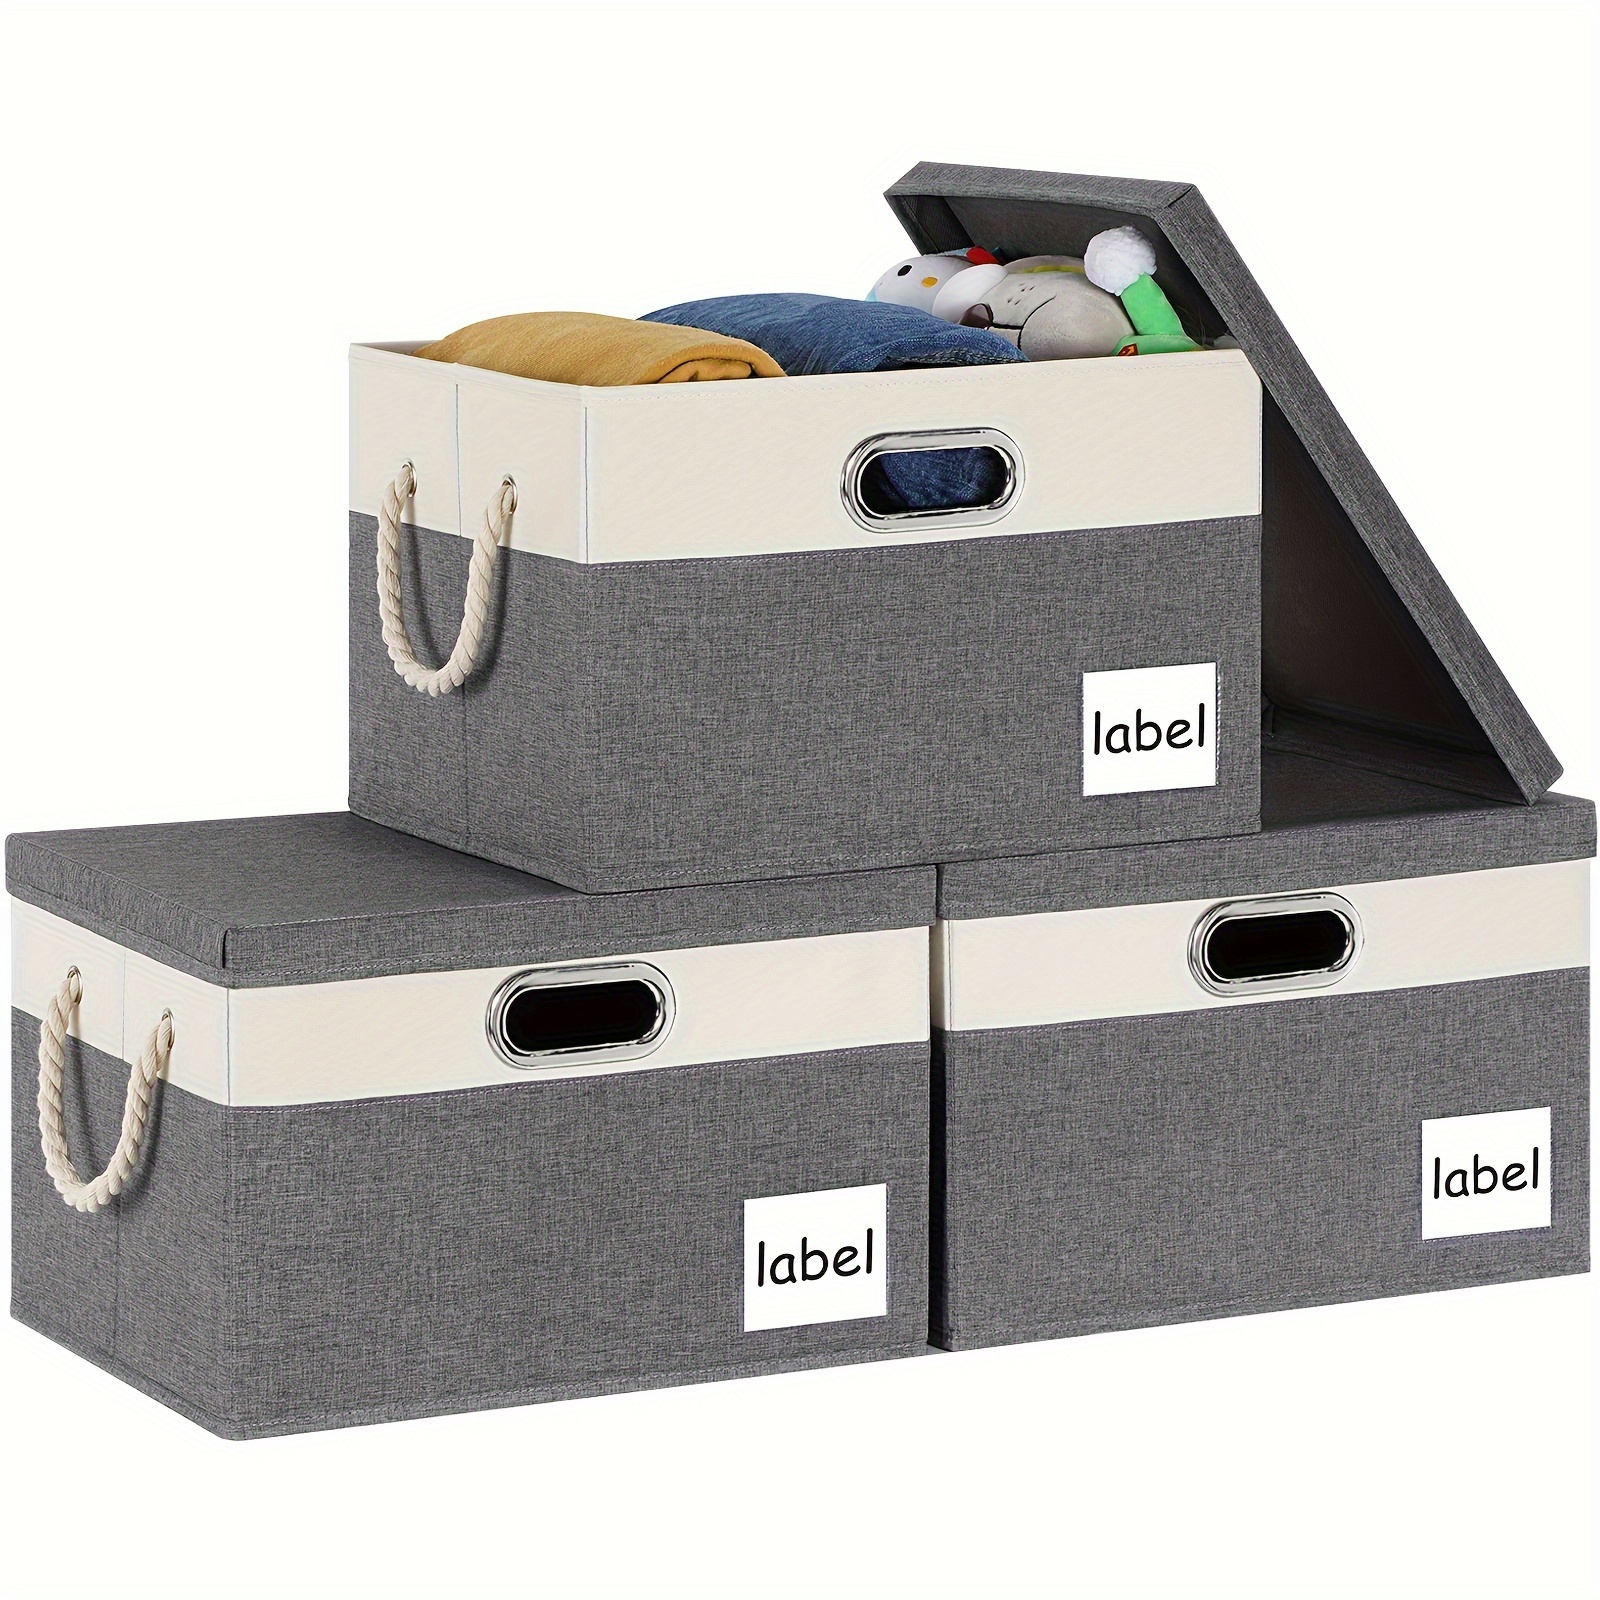 

Larger Collapsible Storage Boxes With Lids Fabric Decorative Bins Cubes Organizer Containers Baskets Handles Divider For Bedroom Closet Living Room